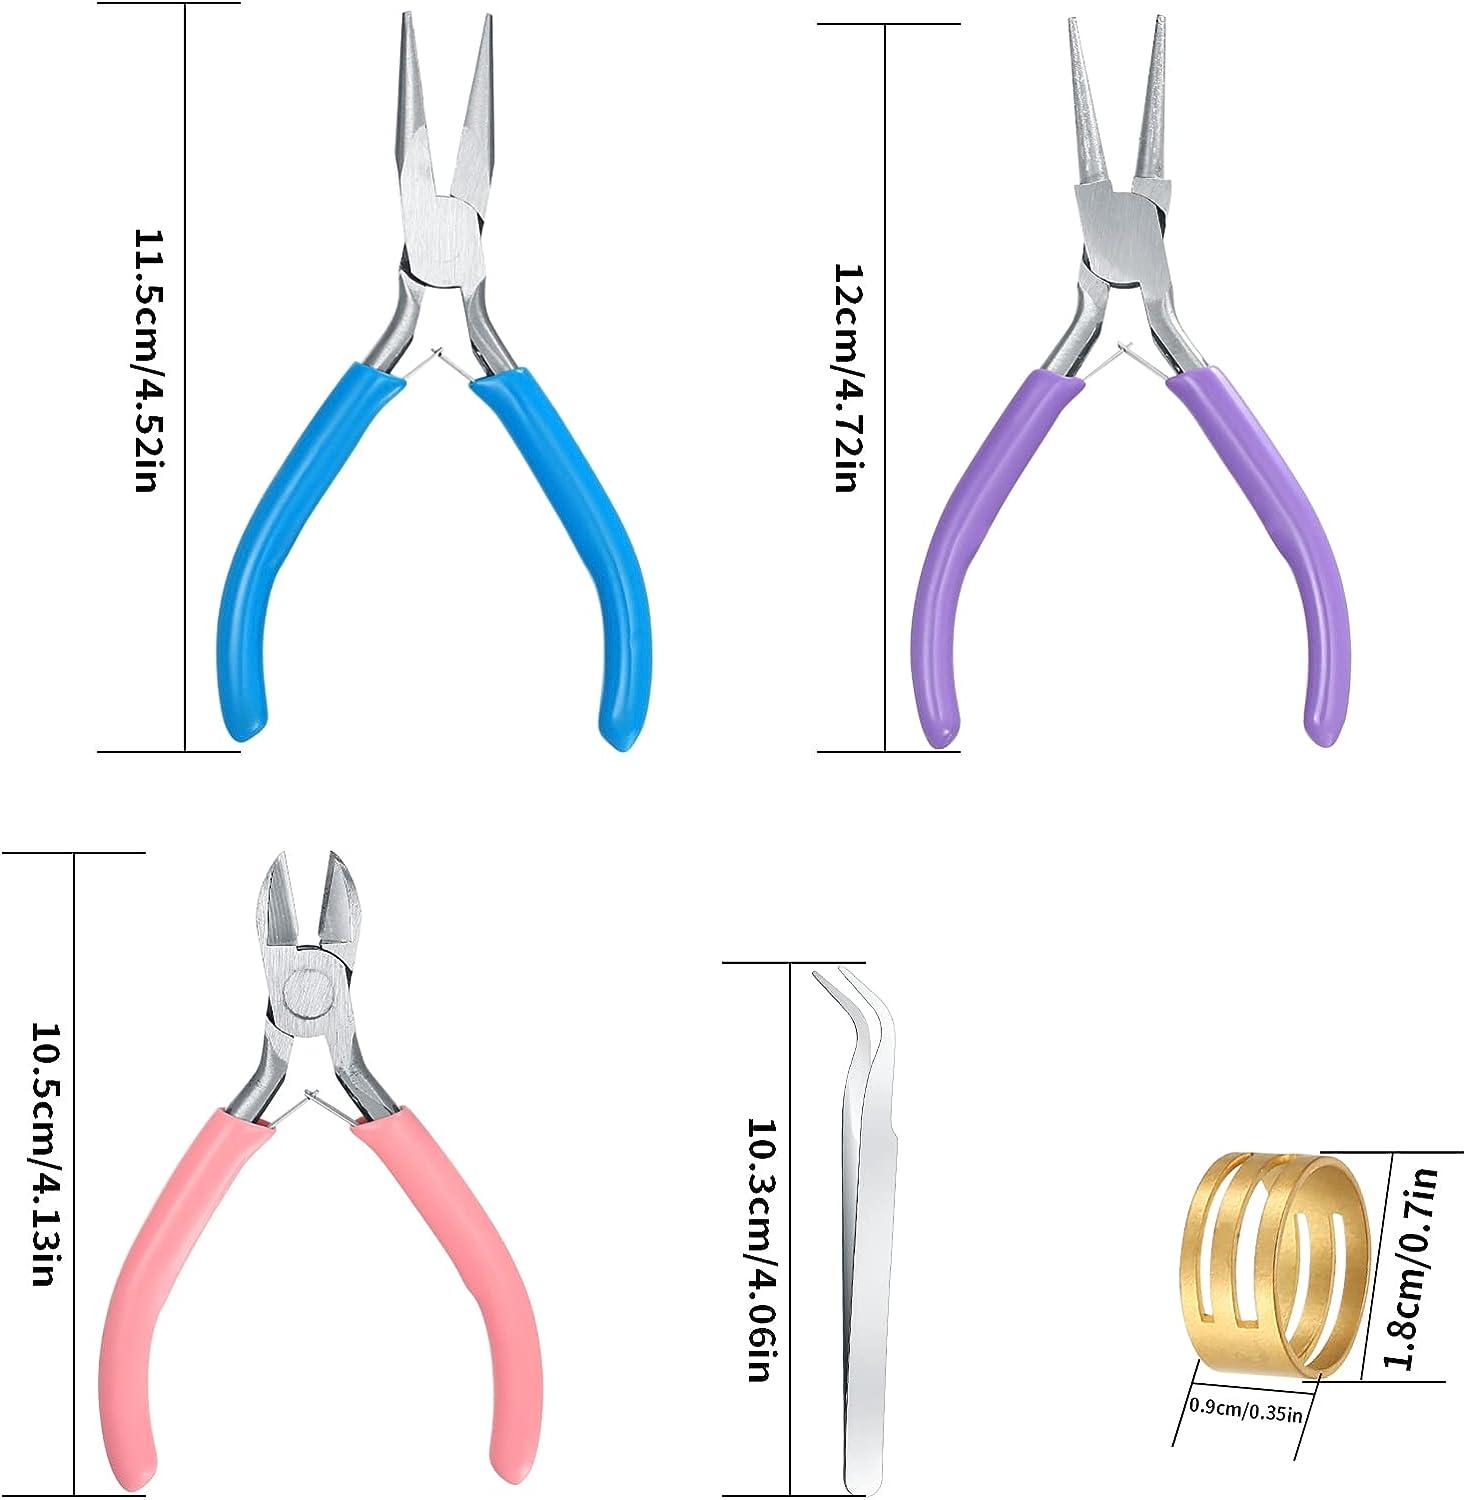 The Basics of Jewelry-Making Pliers